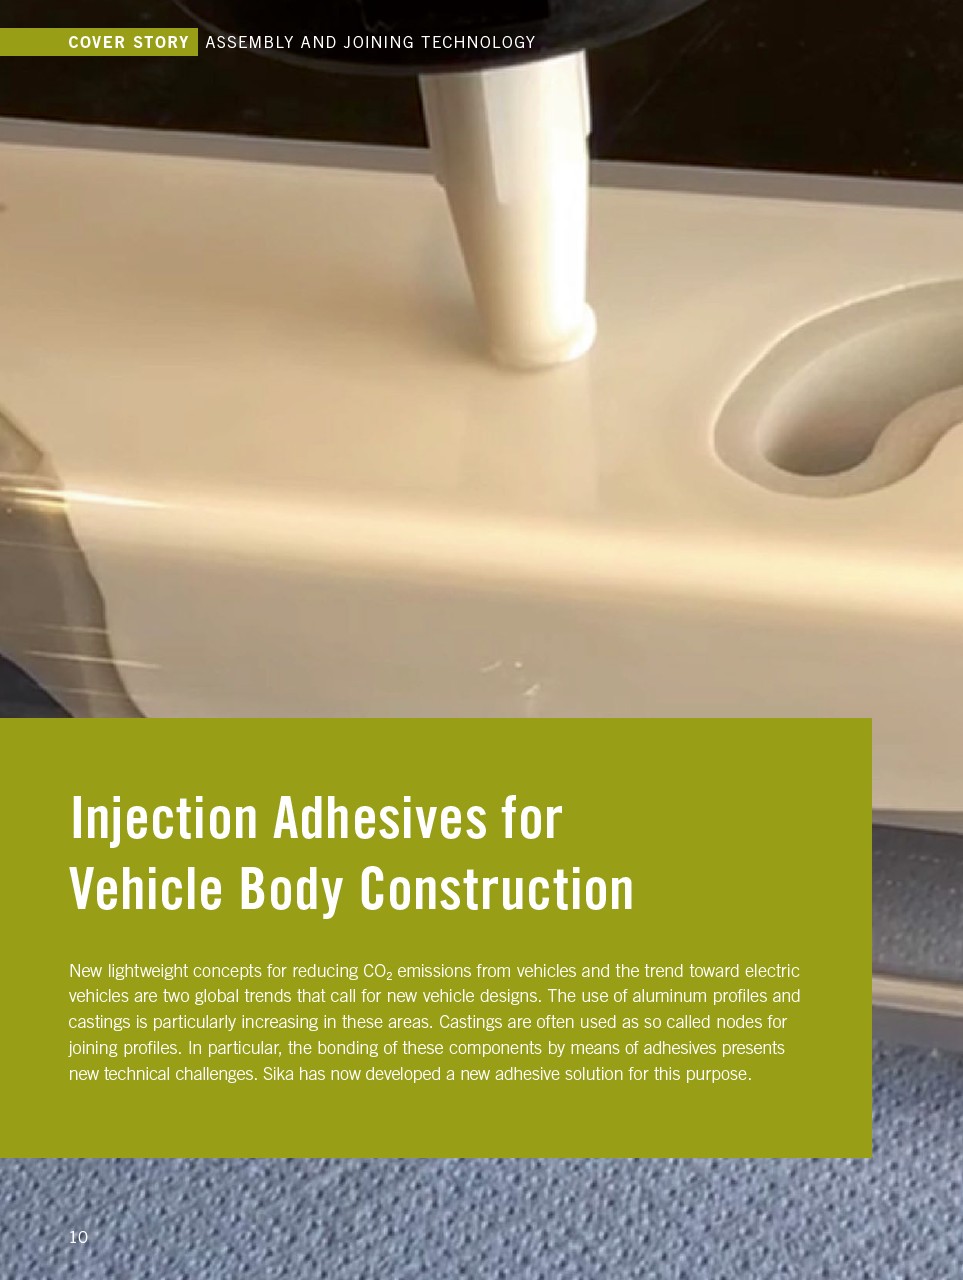 Injection Adhesives for Vehicle Body Construction